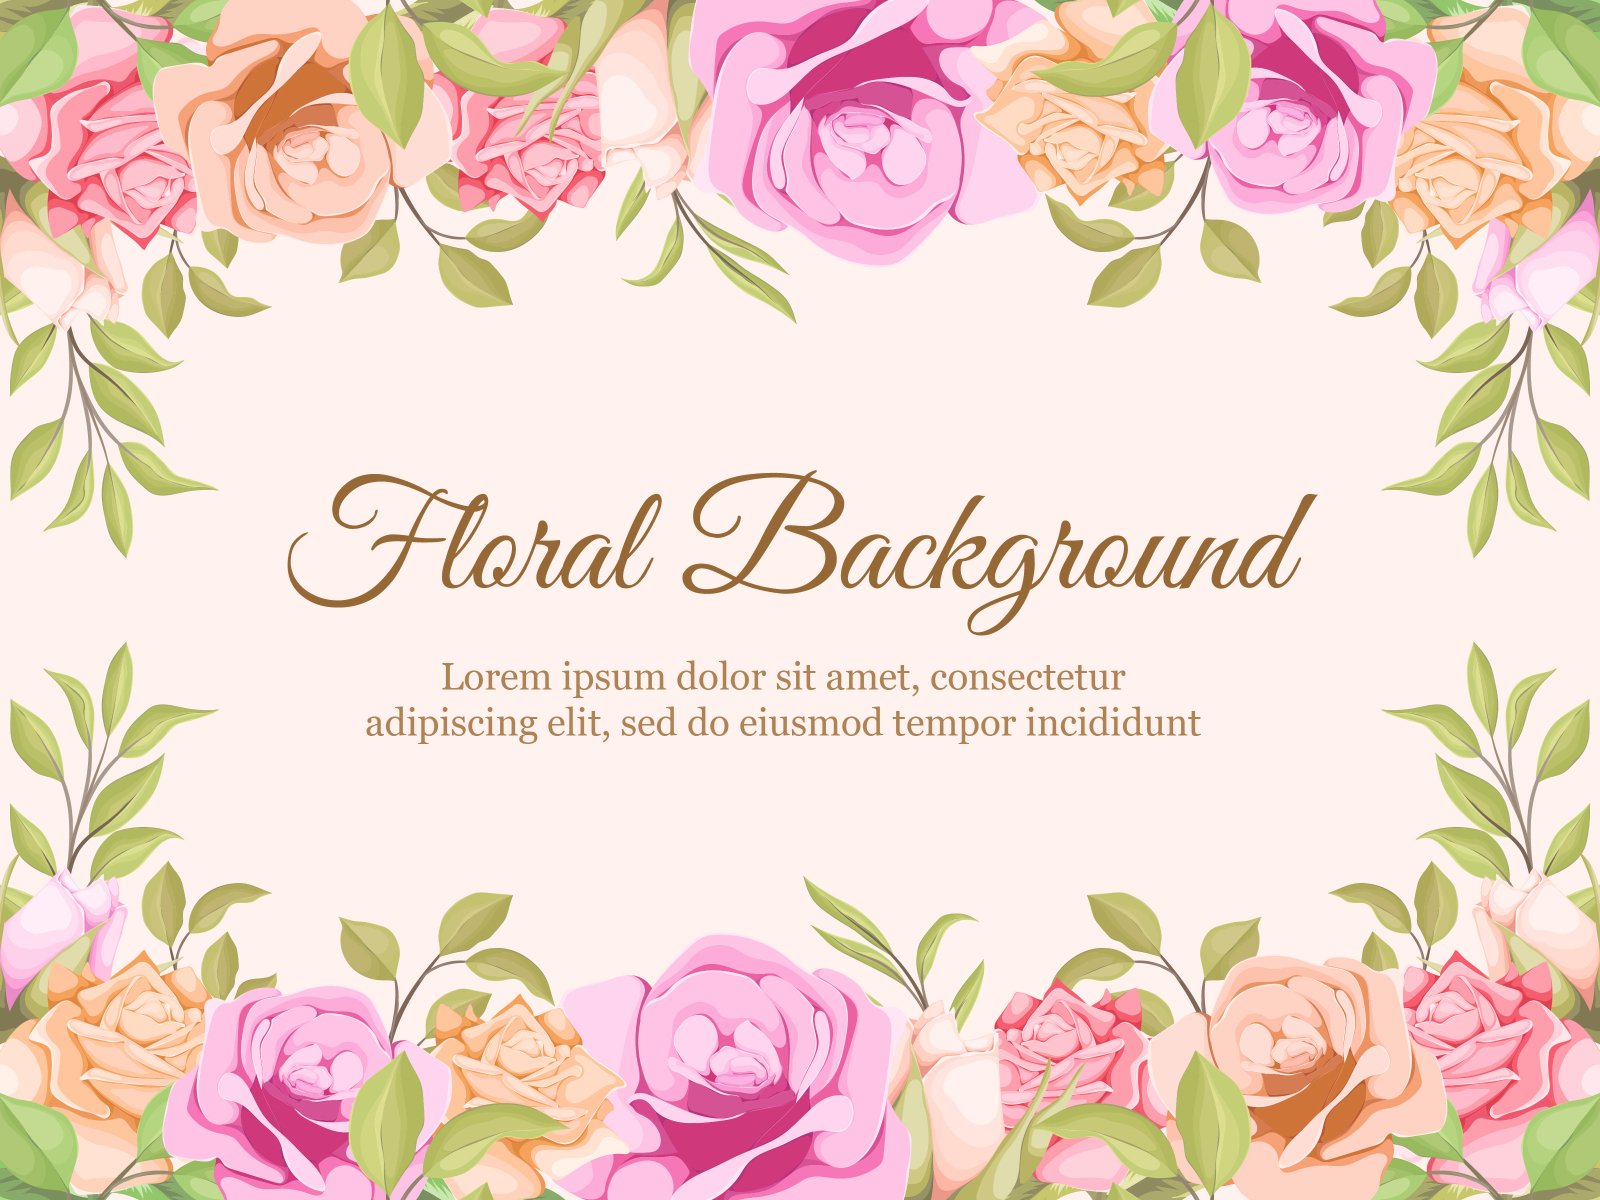 Wedding Banner Background Floral Concept Design by Tri Puspita on Dribbble